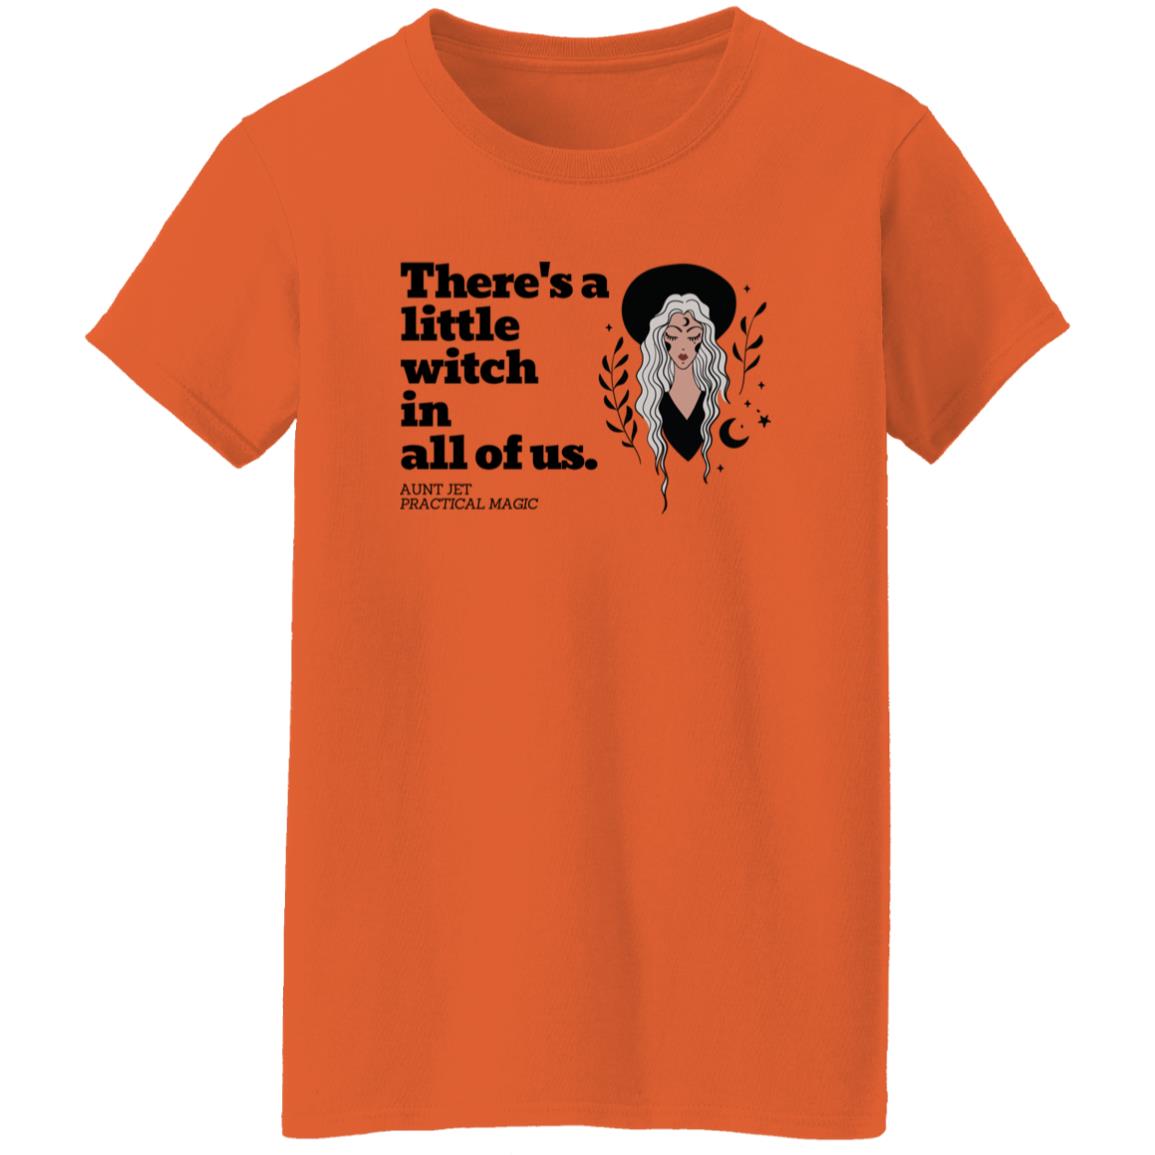 There's a little witch in all of us. T-Shirt